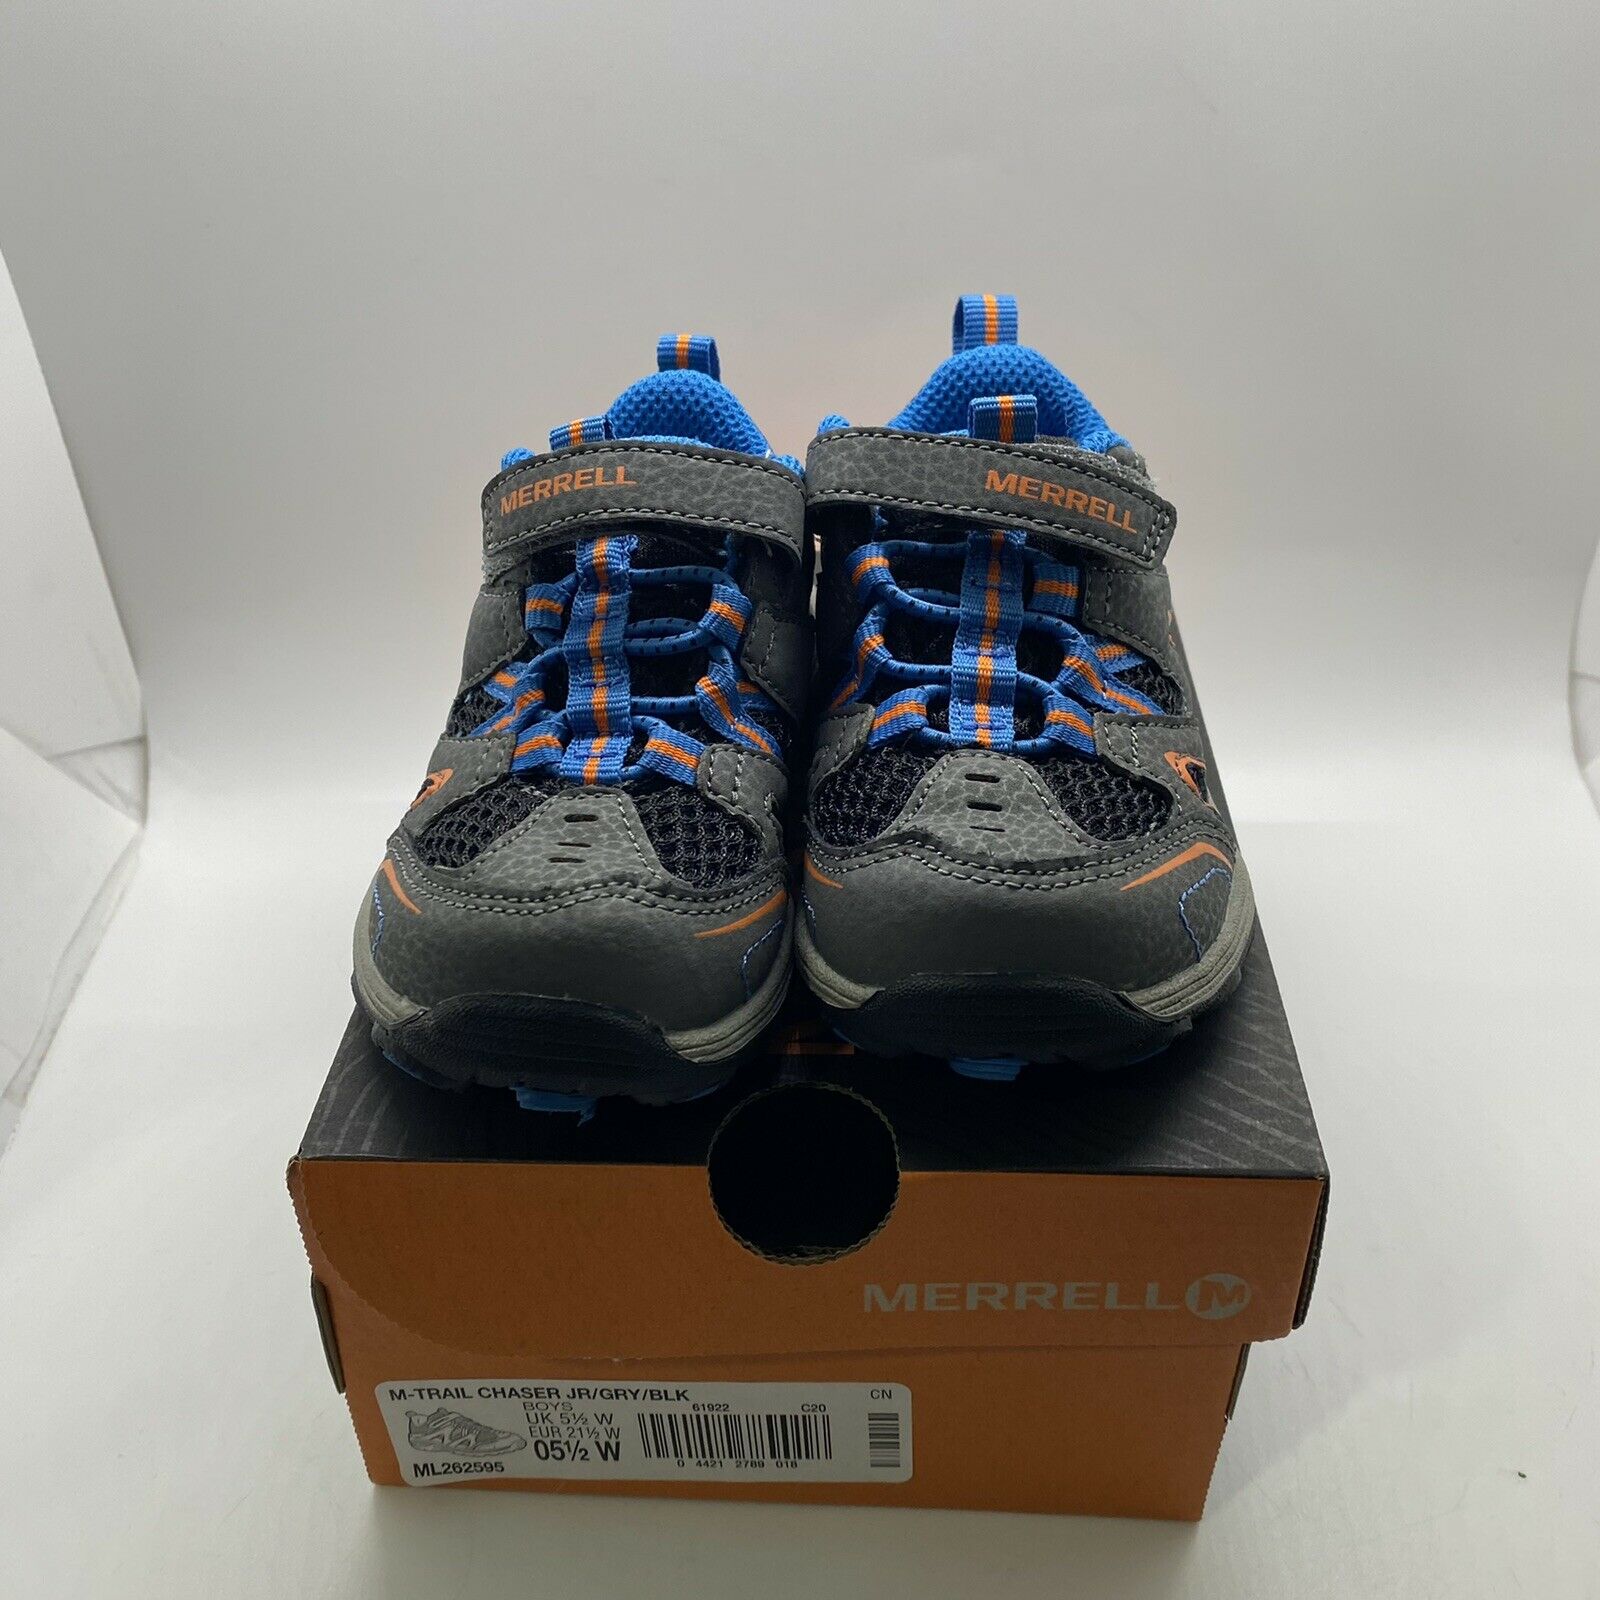 Merrell Toddlers Boy's Trail Chaser Blue/Orange/Grey Hiking Shoes Size 5.5W